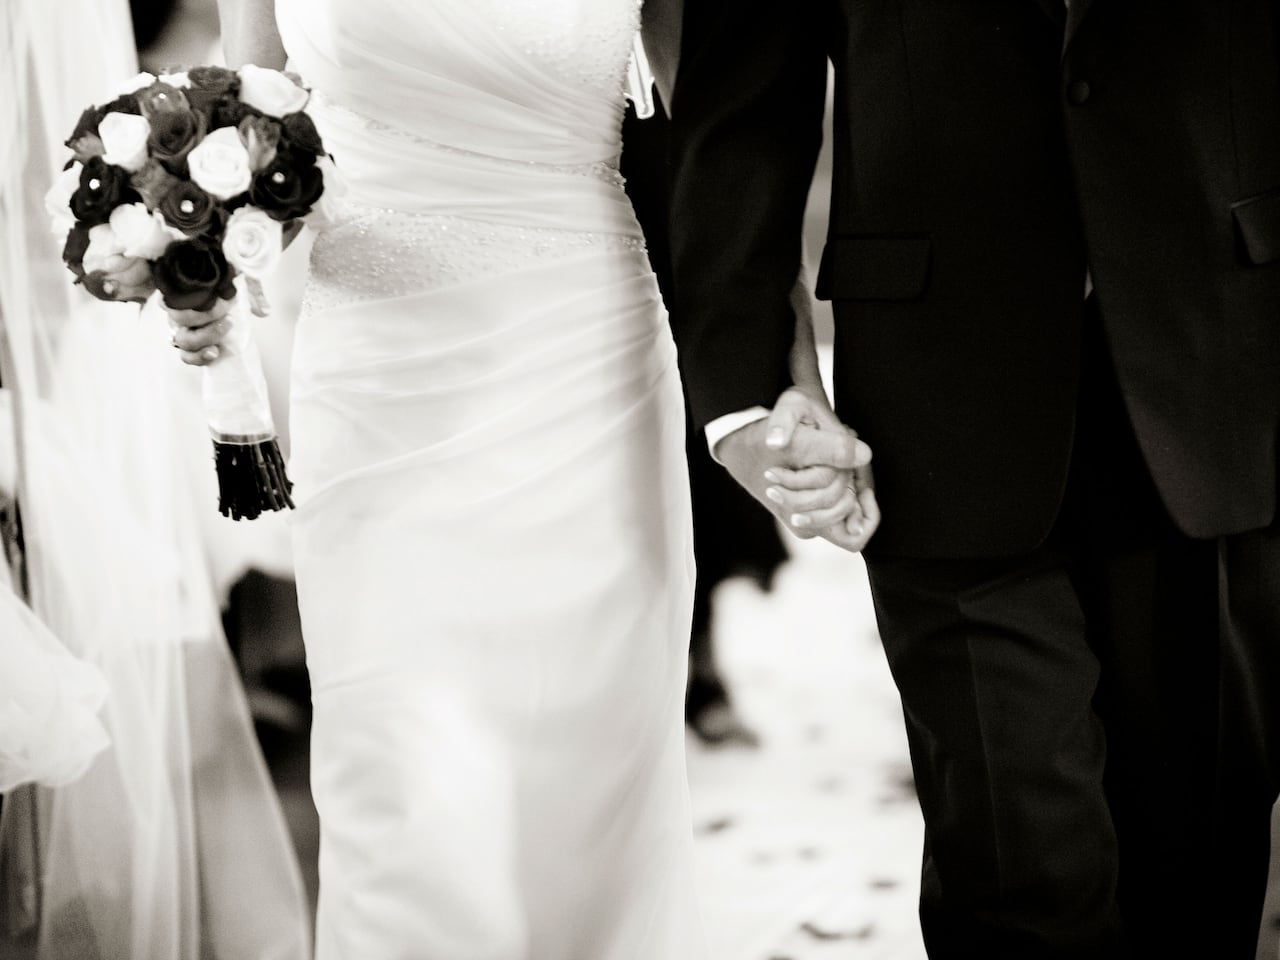 Bride with flowers waling down aisle with man in suit